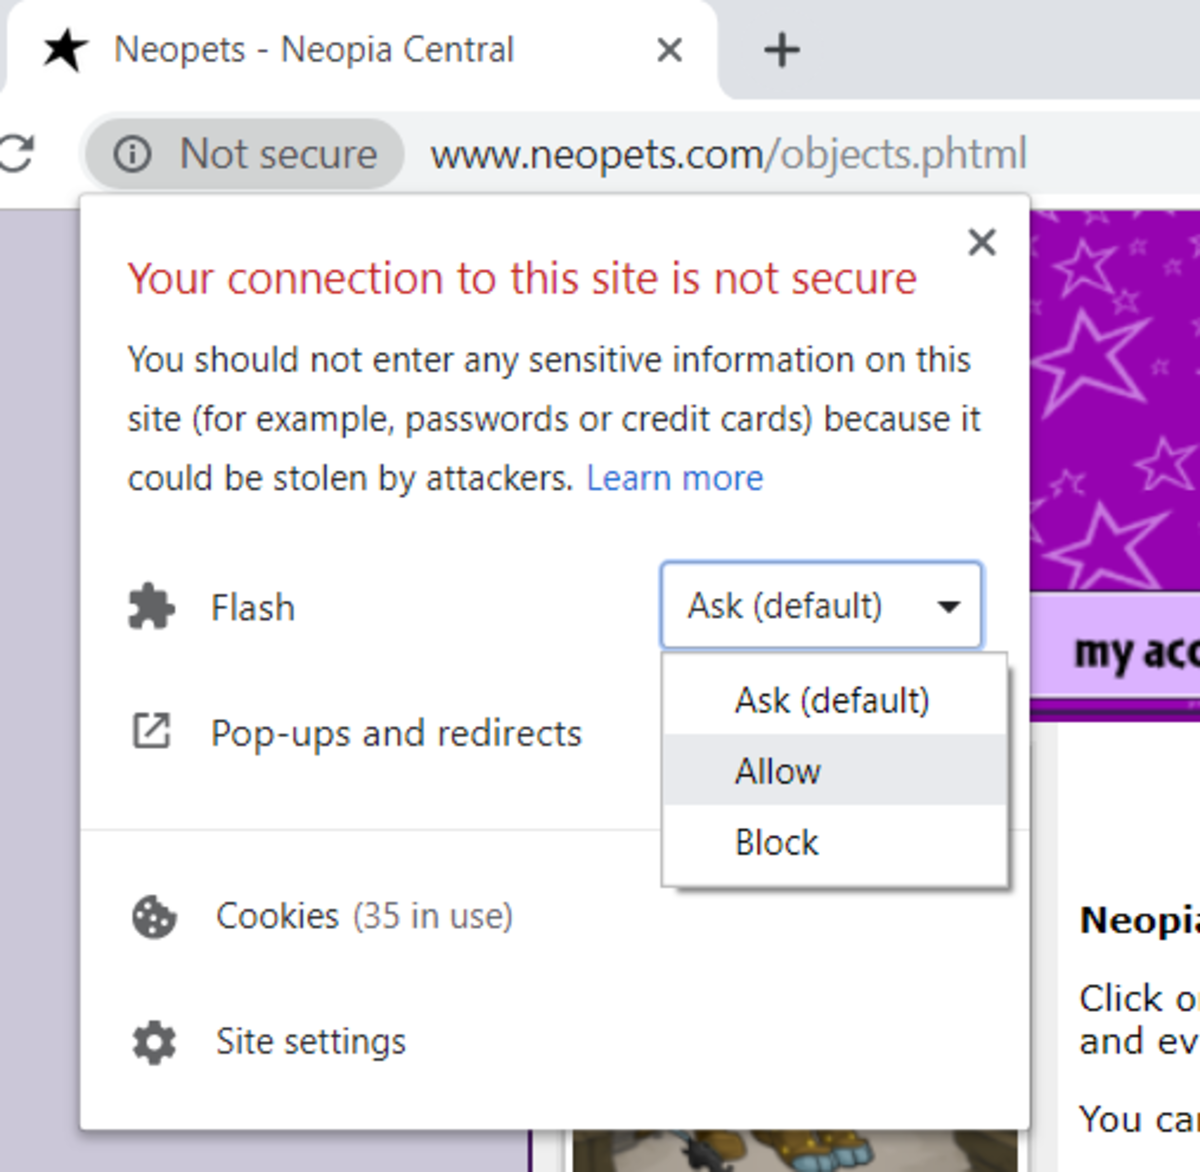 How to enable Flash on "Neopets."